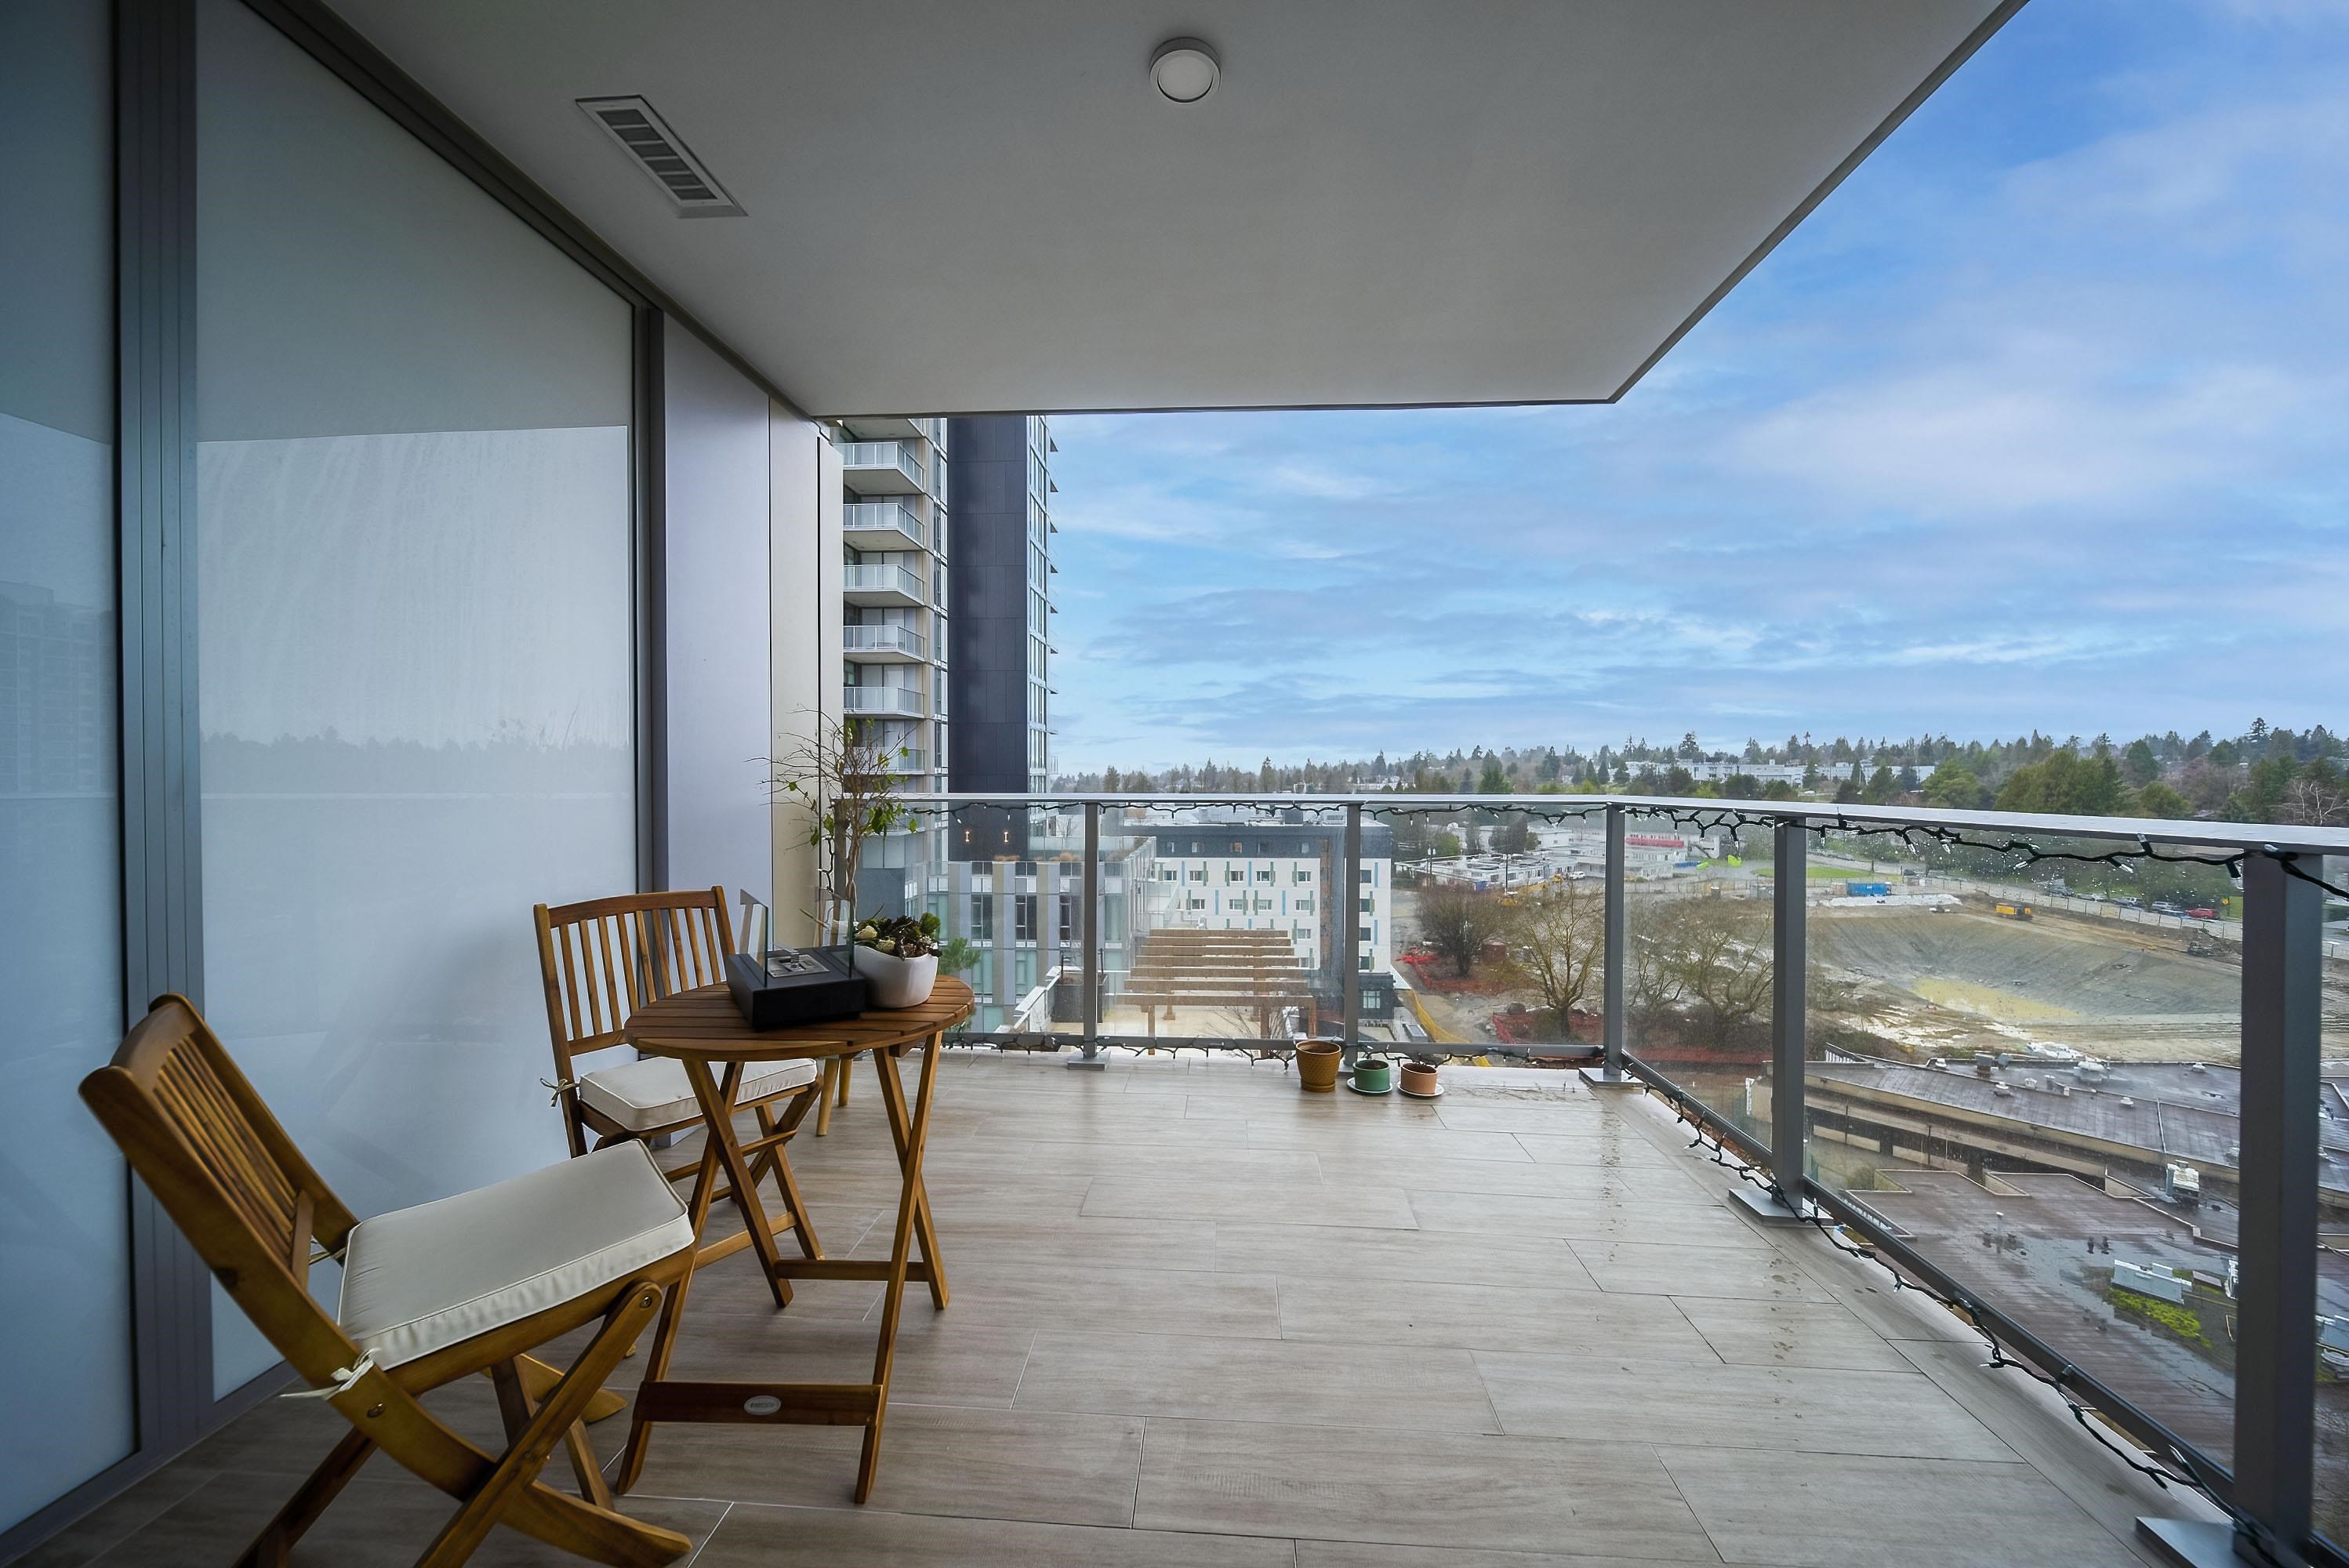 Listing image of 1207 7433 CAMBIE STREET